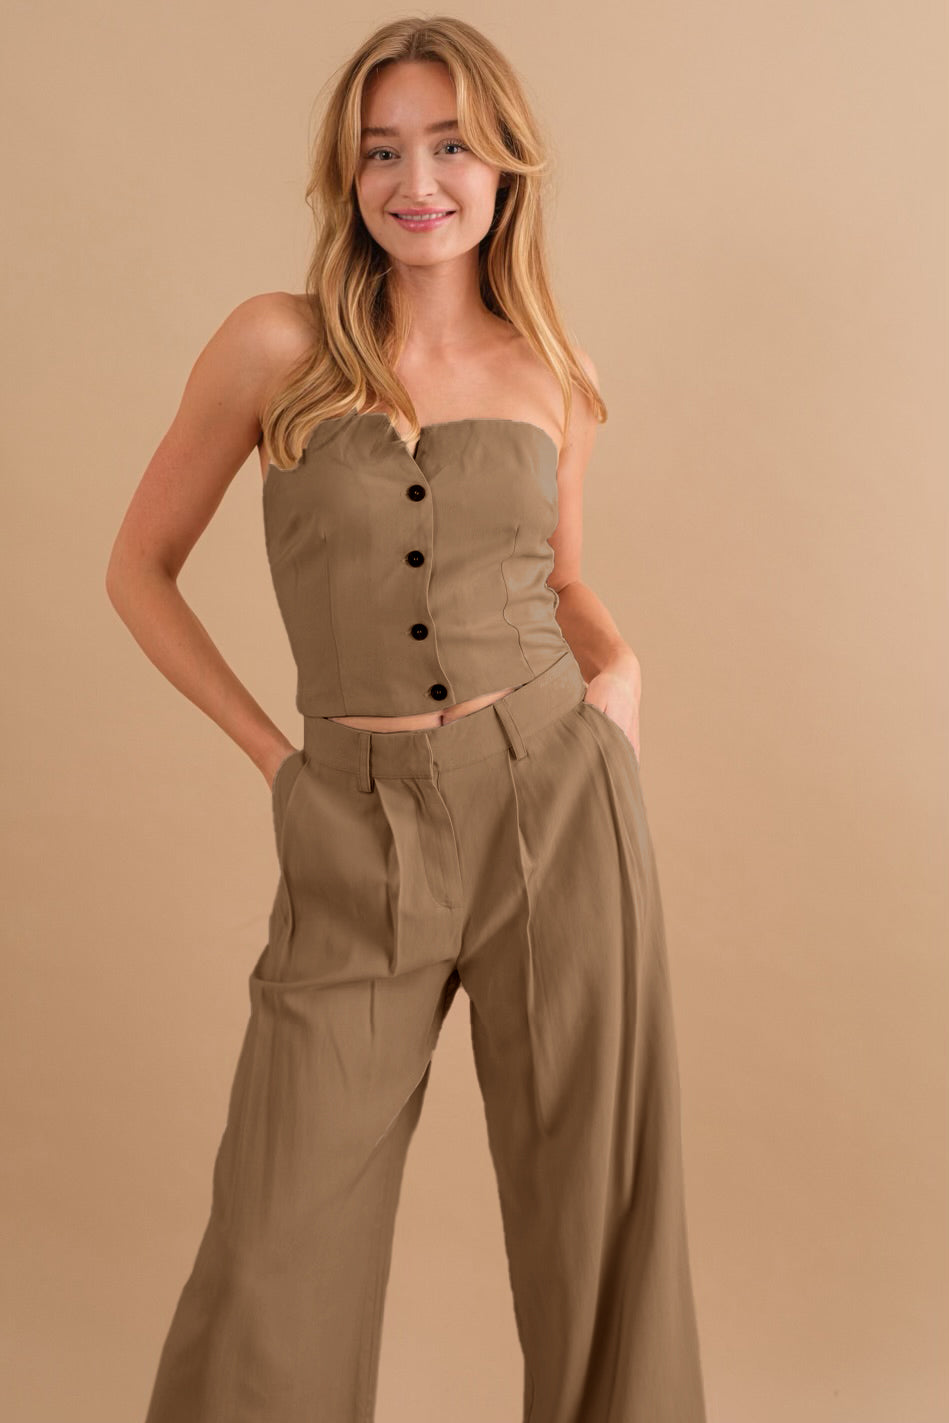 A model wearing a two piece strapless top and pant set against a tan wall .